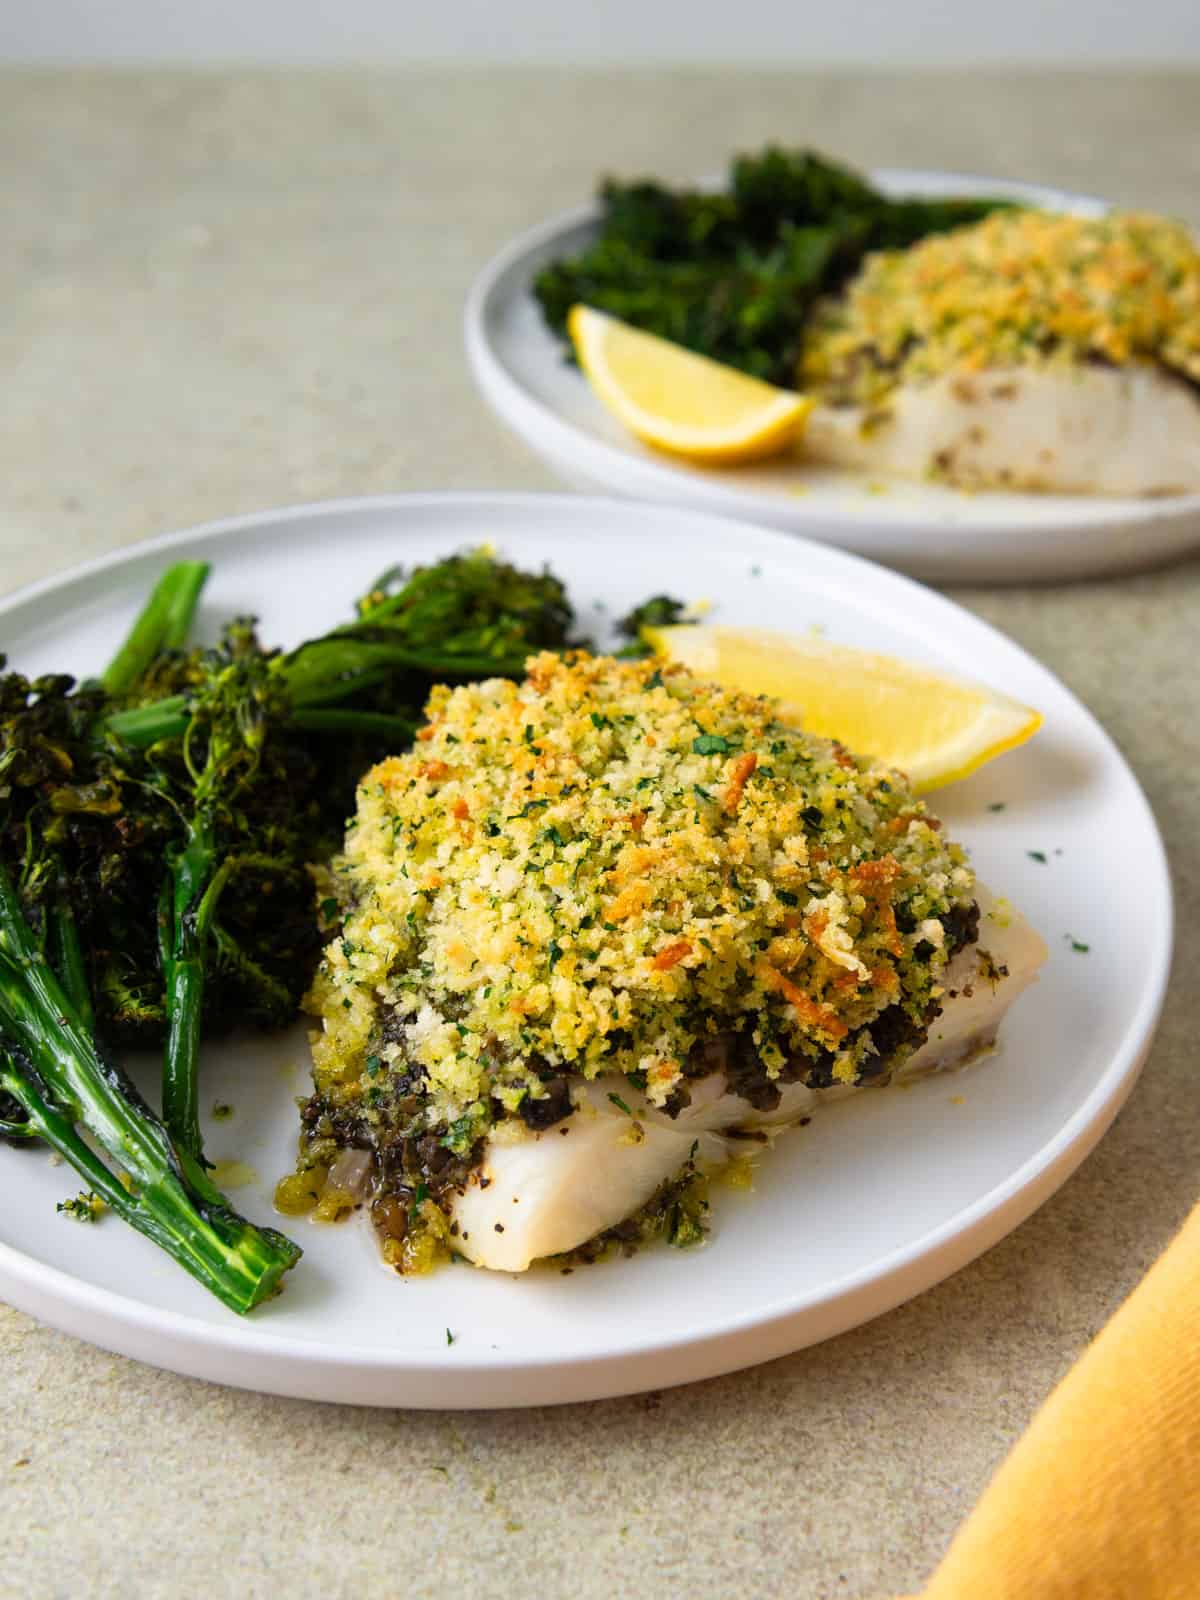 Panko crusted halibut with pesto and served with roasted broccolini on the side.